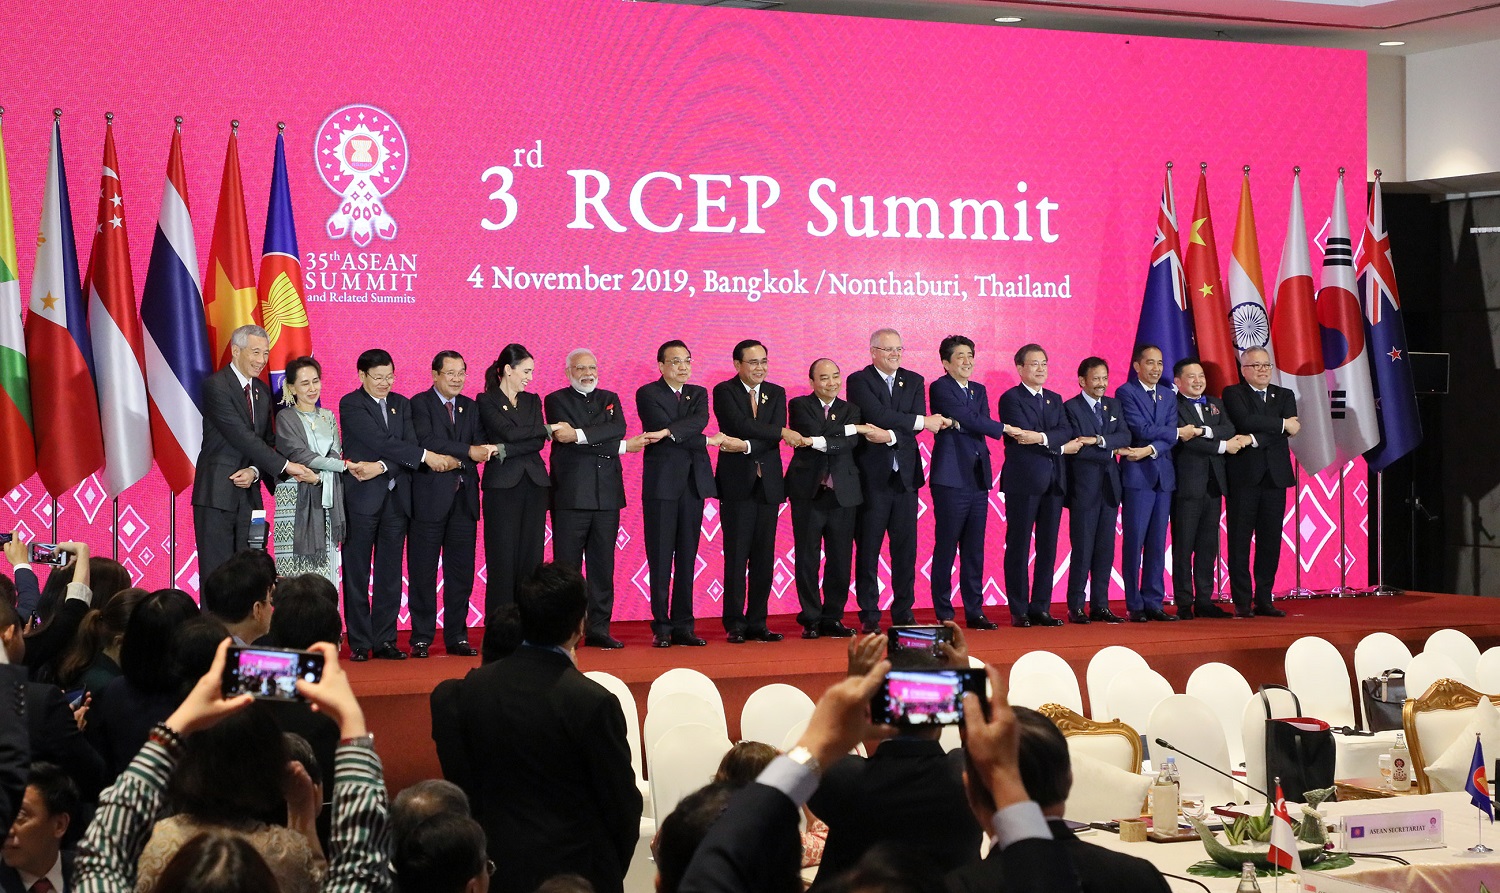 Photograph of the Prime Minister attending a photograph session at the RCEP Summit